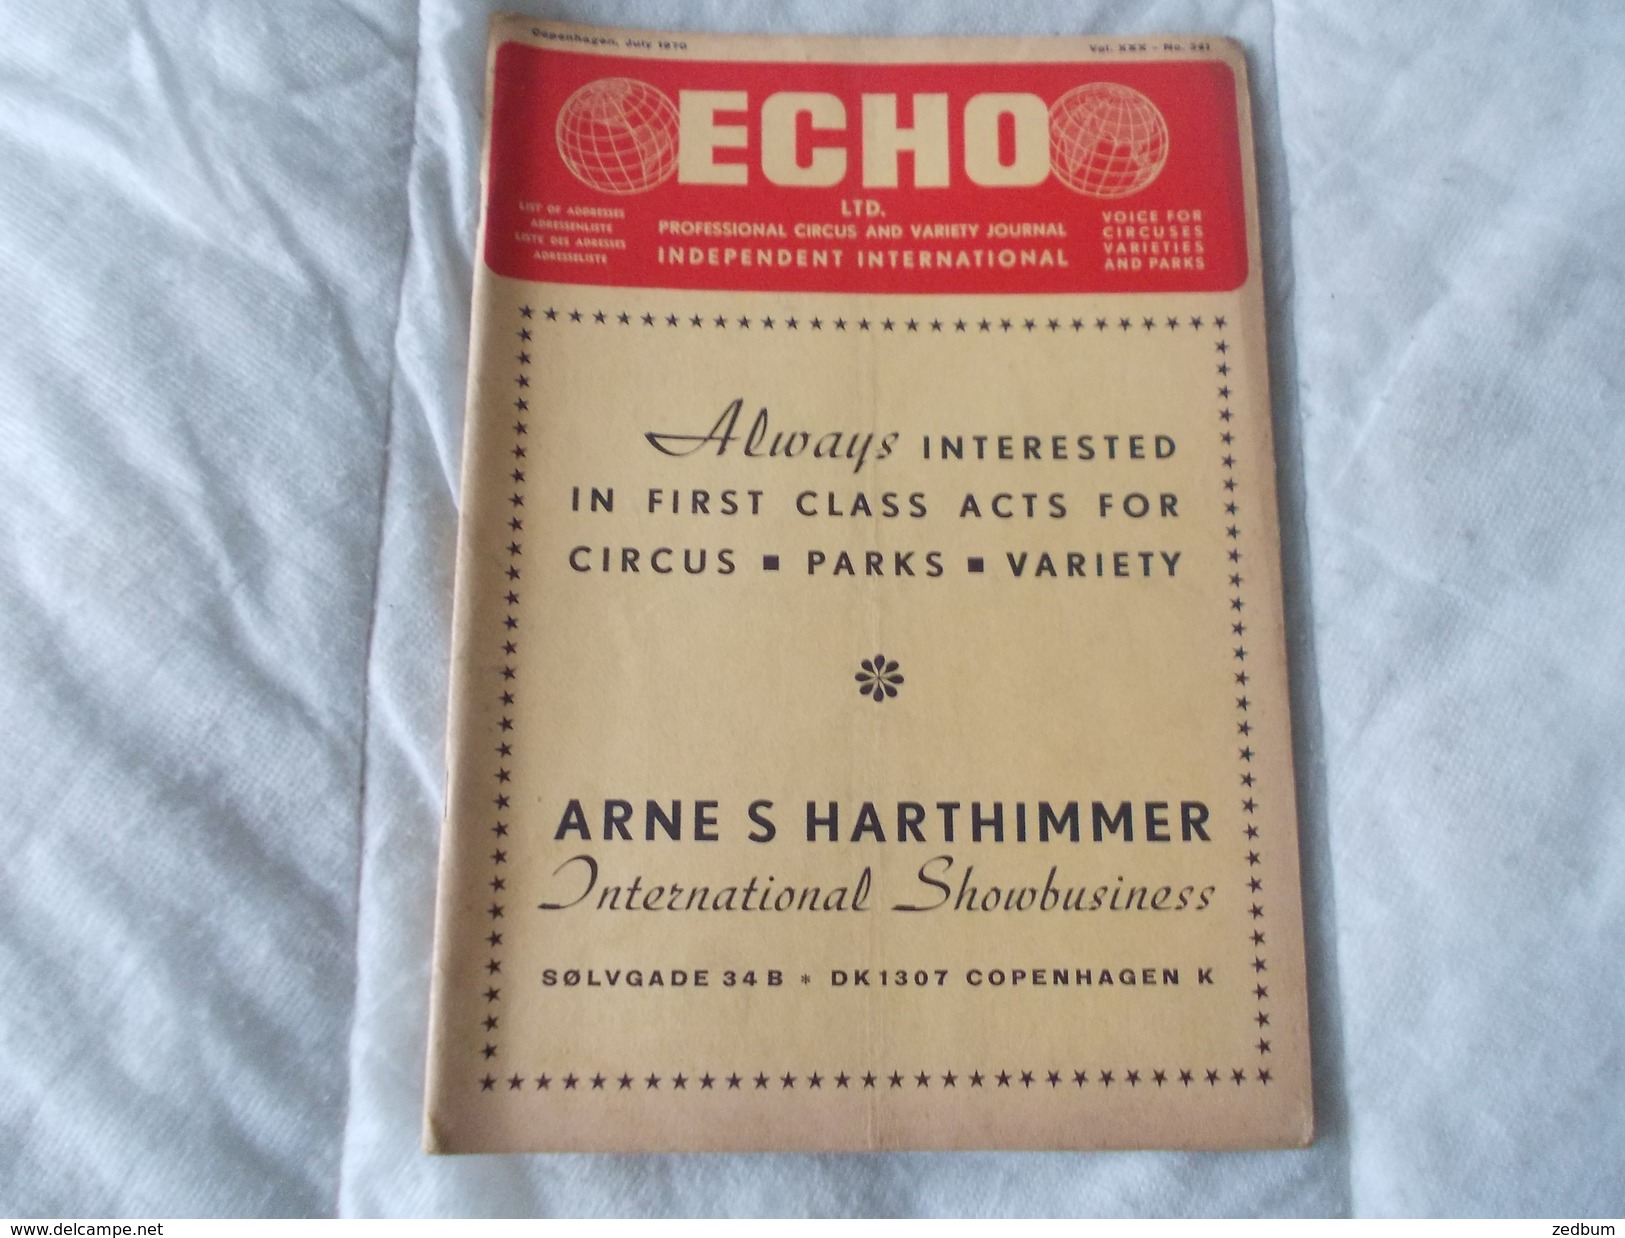 ECHO LTD Professional Circus And Variety Journal Independent International N° 341 July 1970 - Amusement